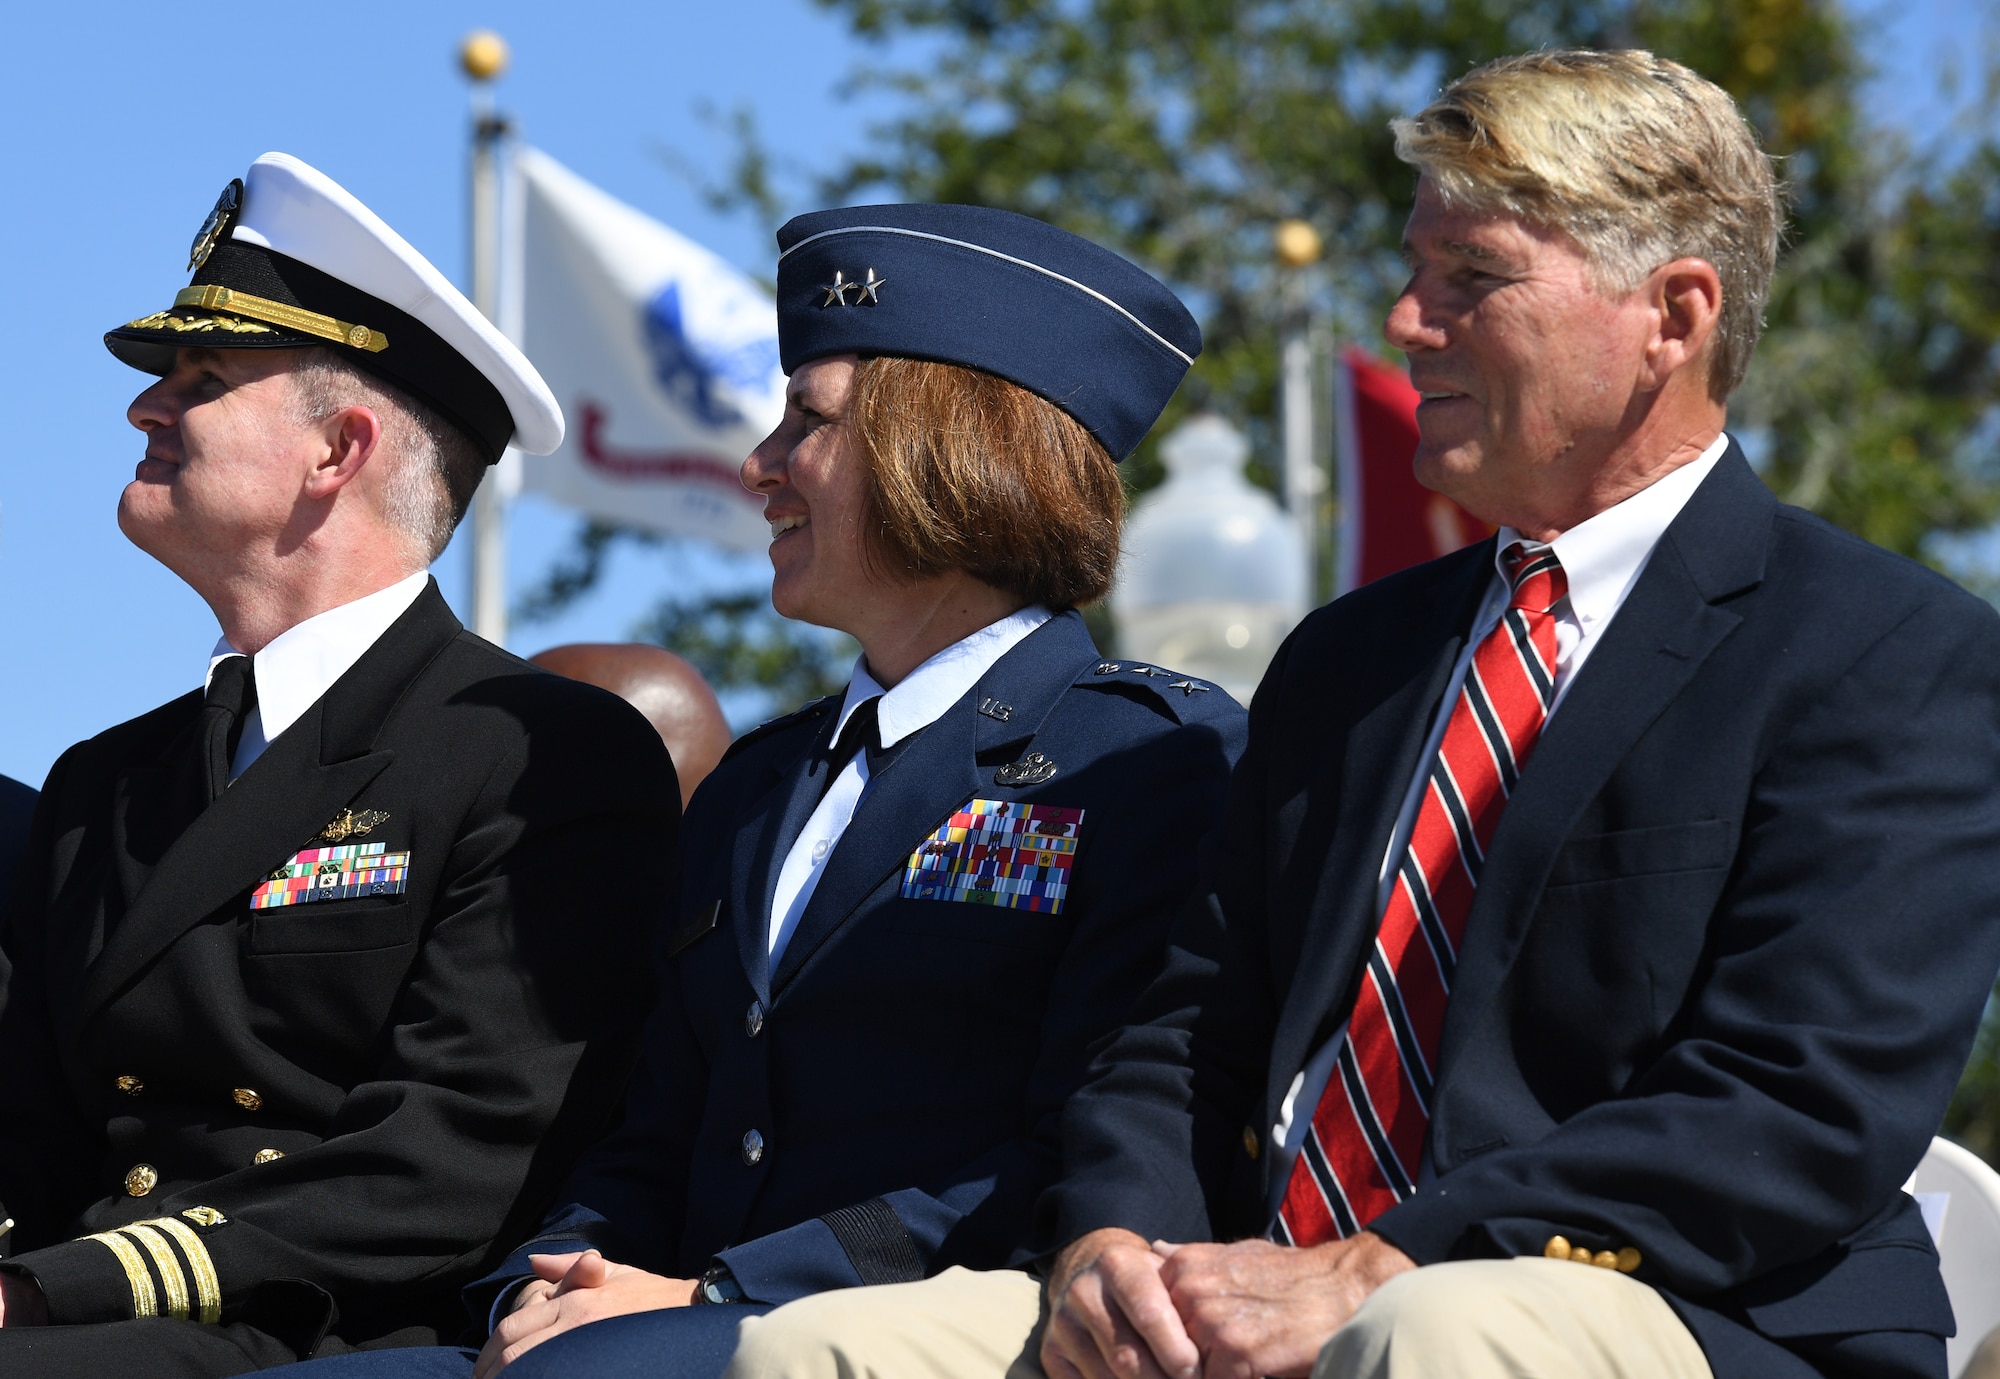 U.S. Air Force Maj. Gen. Andrea Tullos, Second Air Force commander, (center), sits in the reviewing stand with U.S. Navy Commander William Pitcairn IV, Naval Construction Battalion Center executive officer, Gulfport, Mississippi, and Gene Taylor, former U.S. Representative, during the 19th Annual Gulf Coast Veterans Day Parade in DíIberville, Mississippi, Nov. 9, 2019. Keesler Air Force Base leadership, along with hundreds of Airmen, attended and participated in the parade in support of all veterans past and present. More than 70 unique floats, marching bands and military units marched in the largest Veterans Day parade on the Gulf Coast. (U.S. Air Force photo by Kemberly Groue)